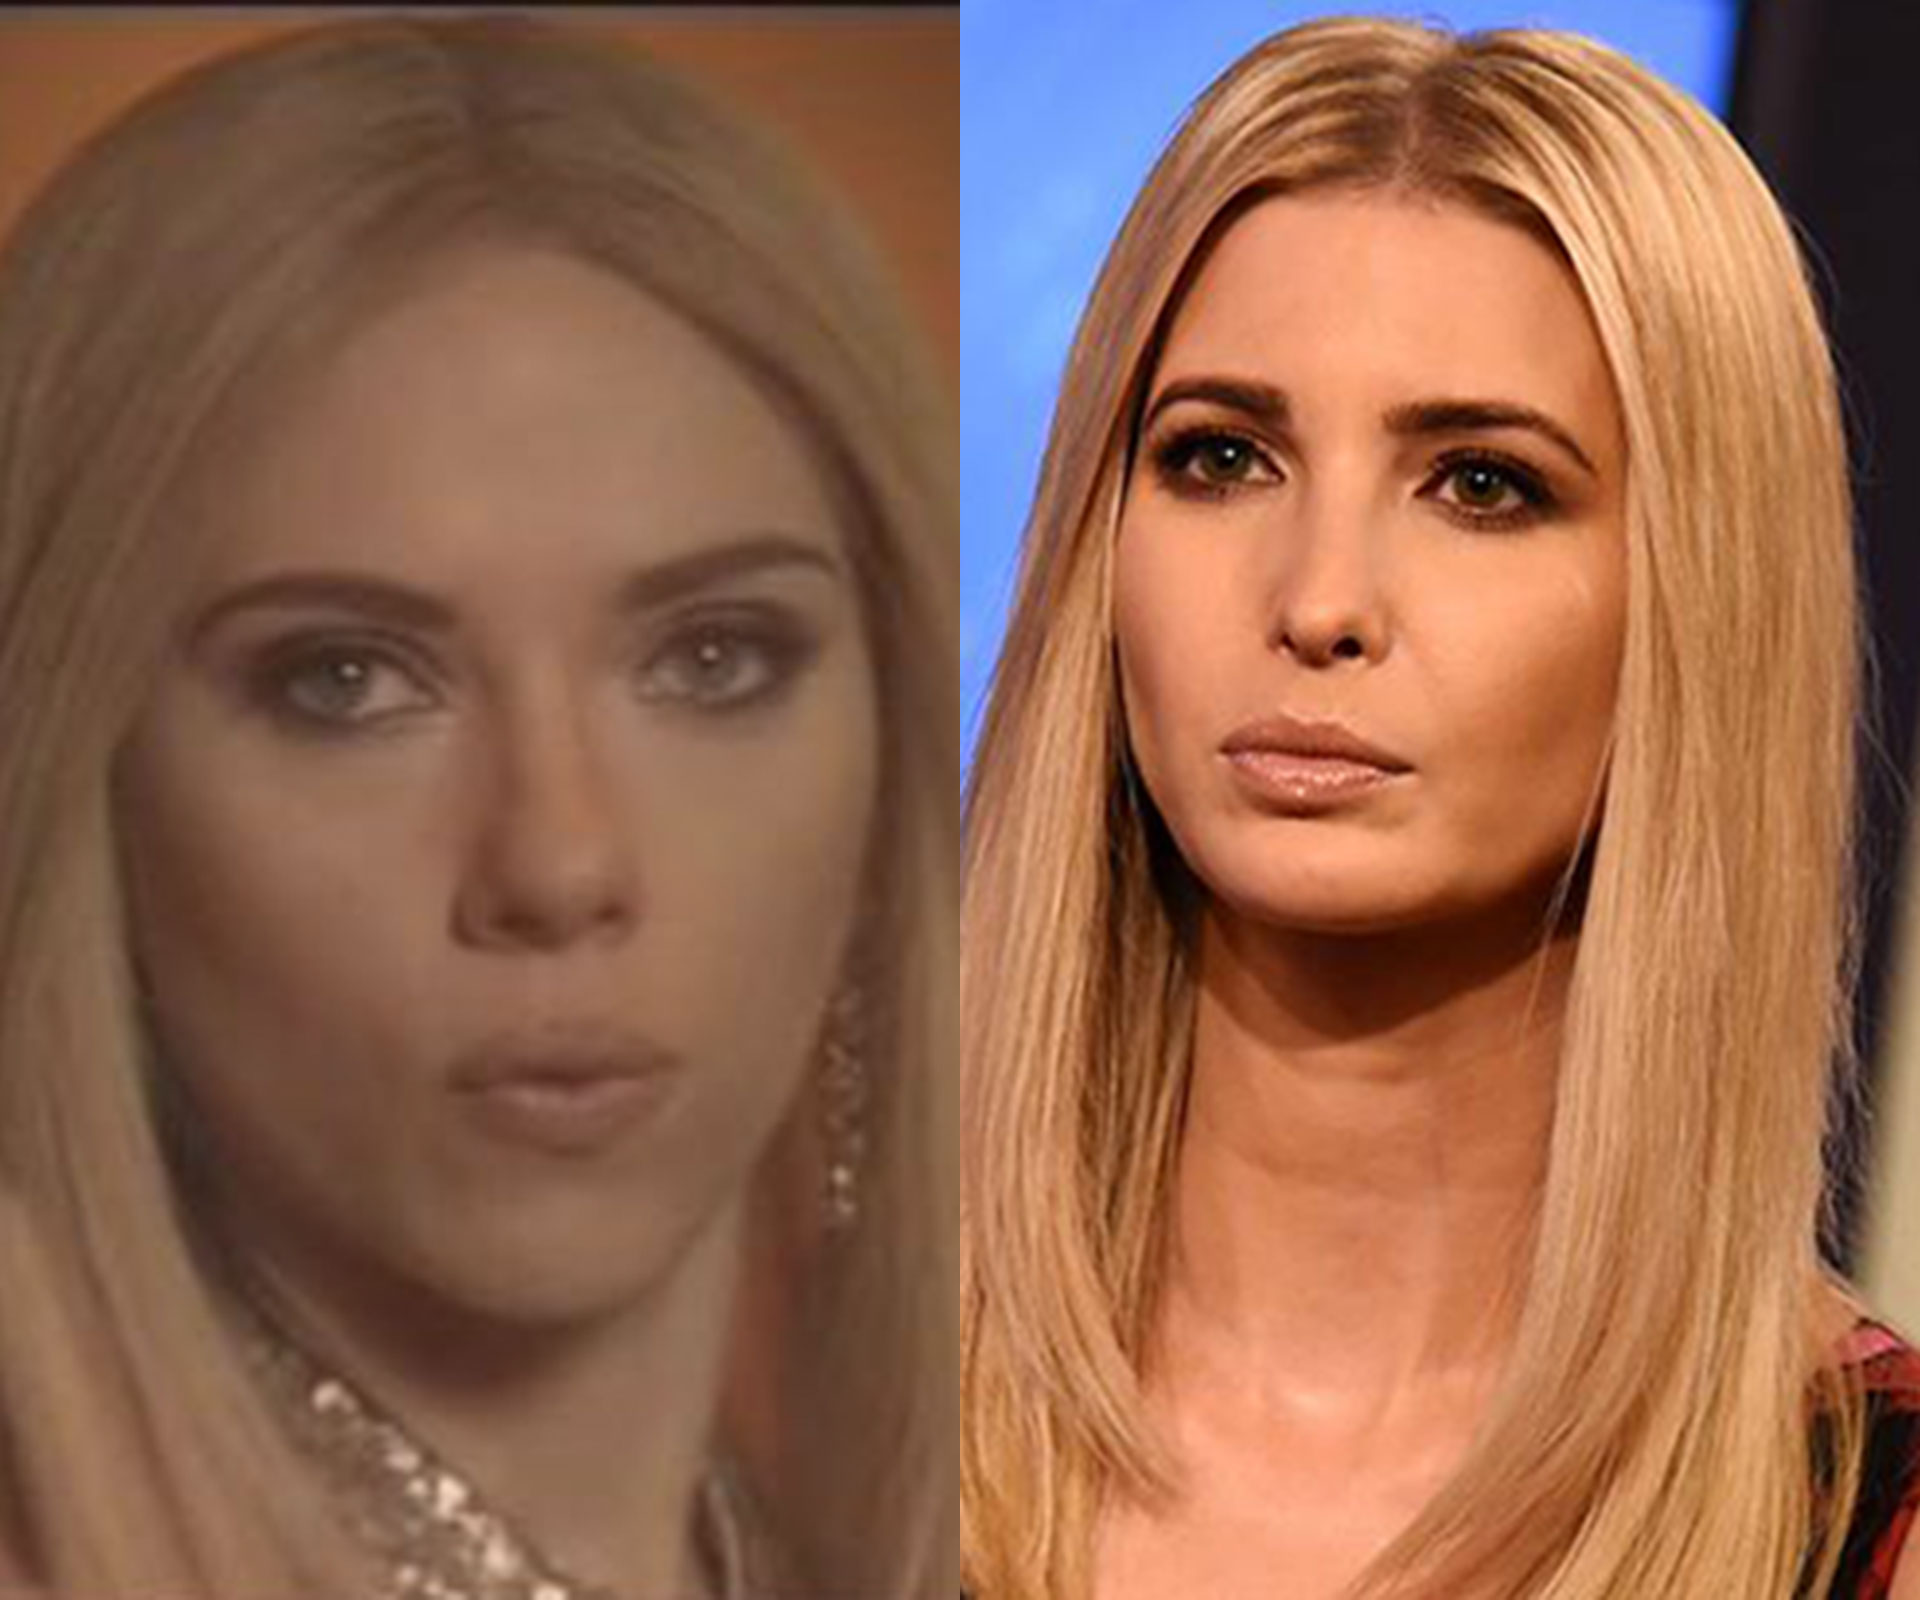 Scarlett Johansson playing first daughter Ivanka Trump on SNL is what the world needs right now